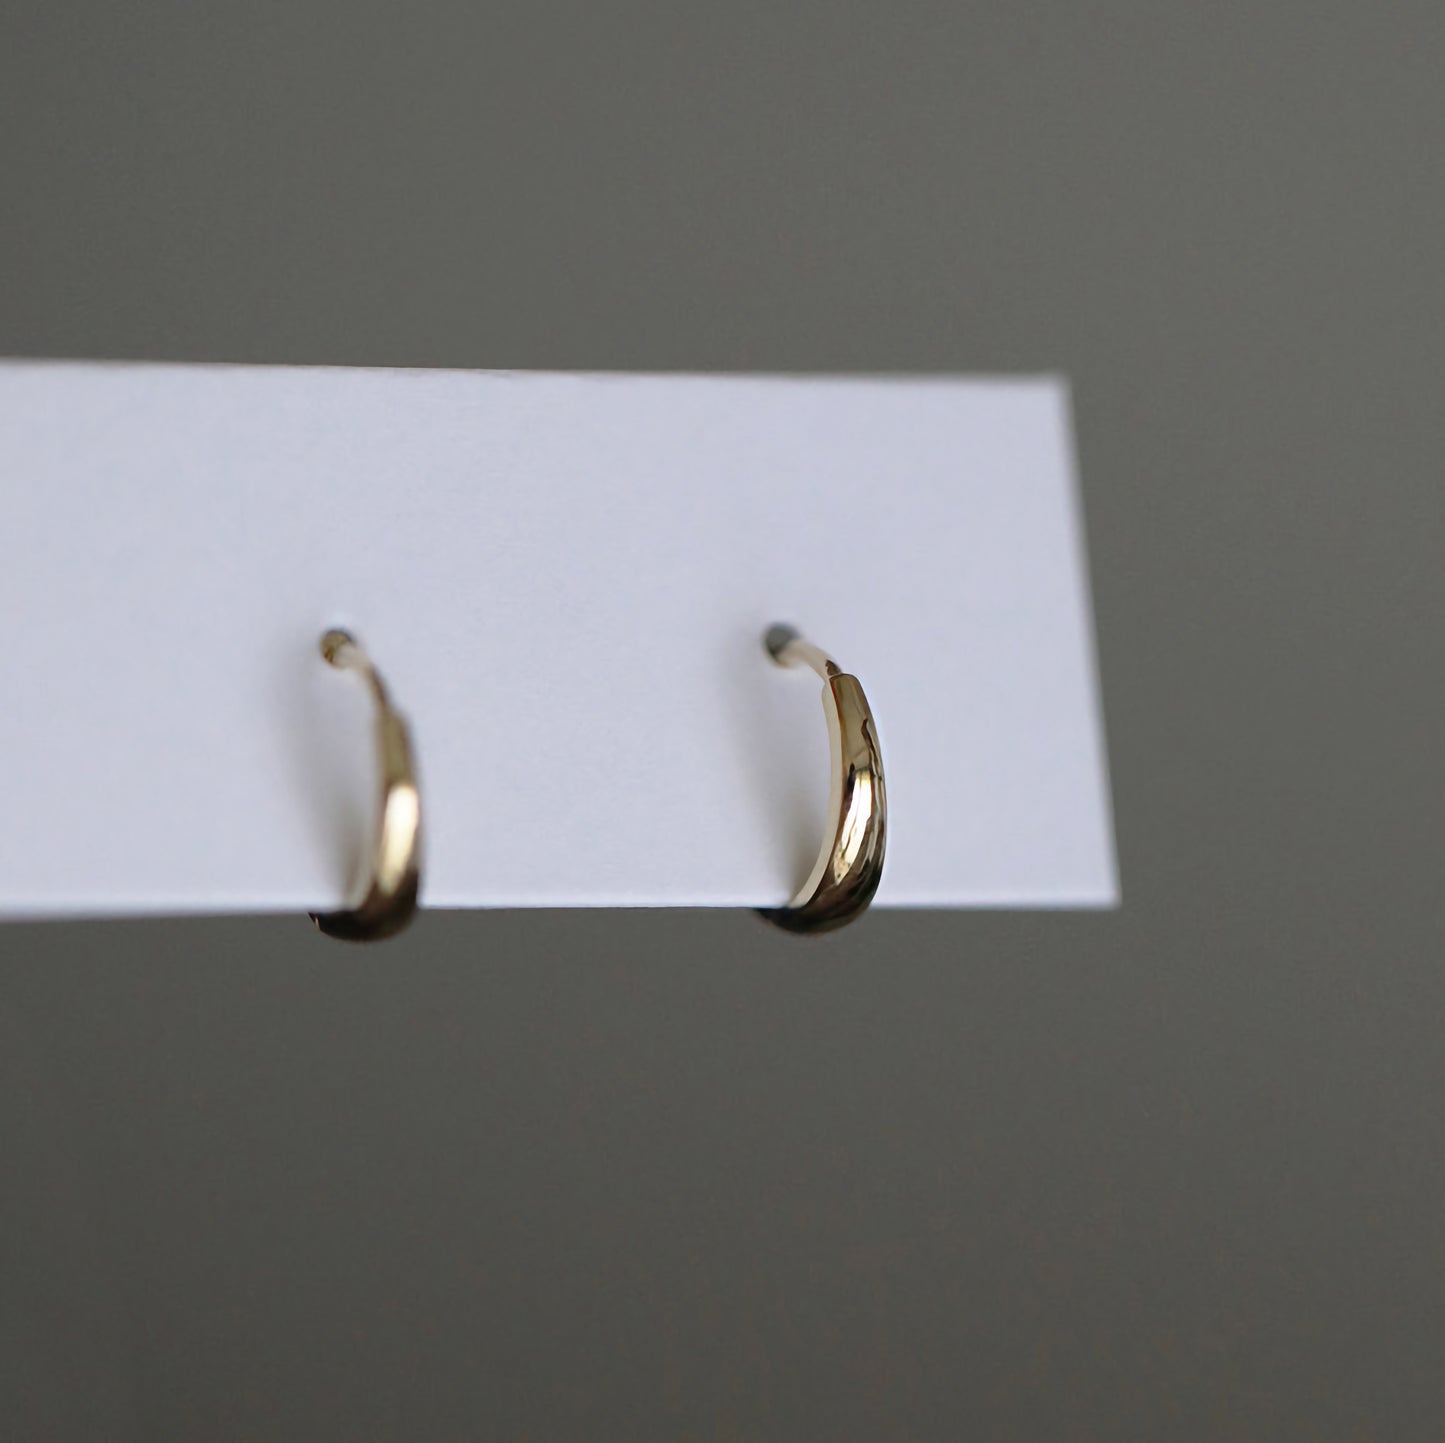 9ct Solid Gold Minimalist Hoops 9K Birthday Earrings Minimalist Jewelry Gift Ready to Dispatch Gold Accessories